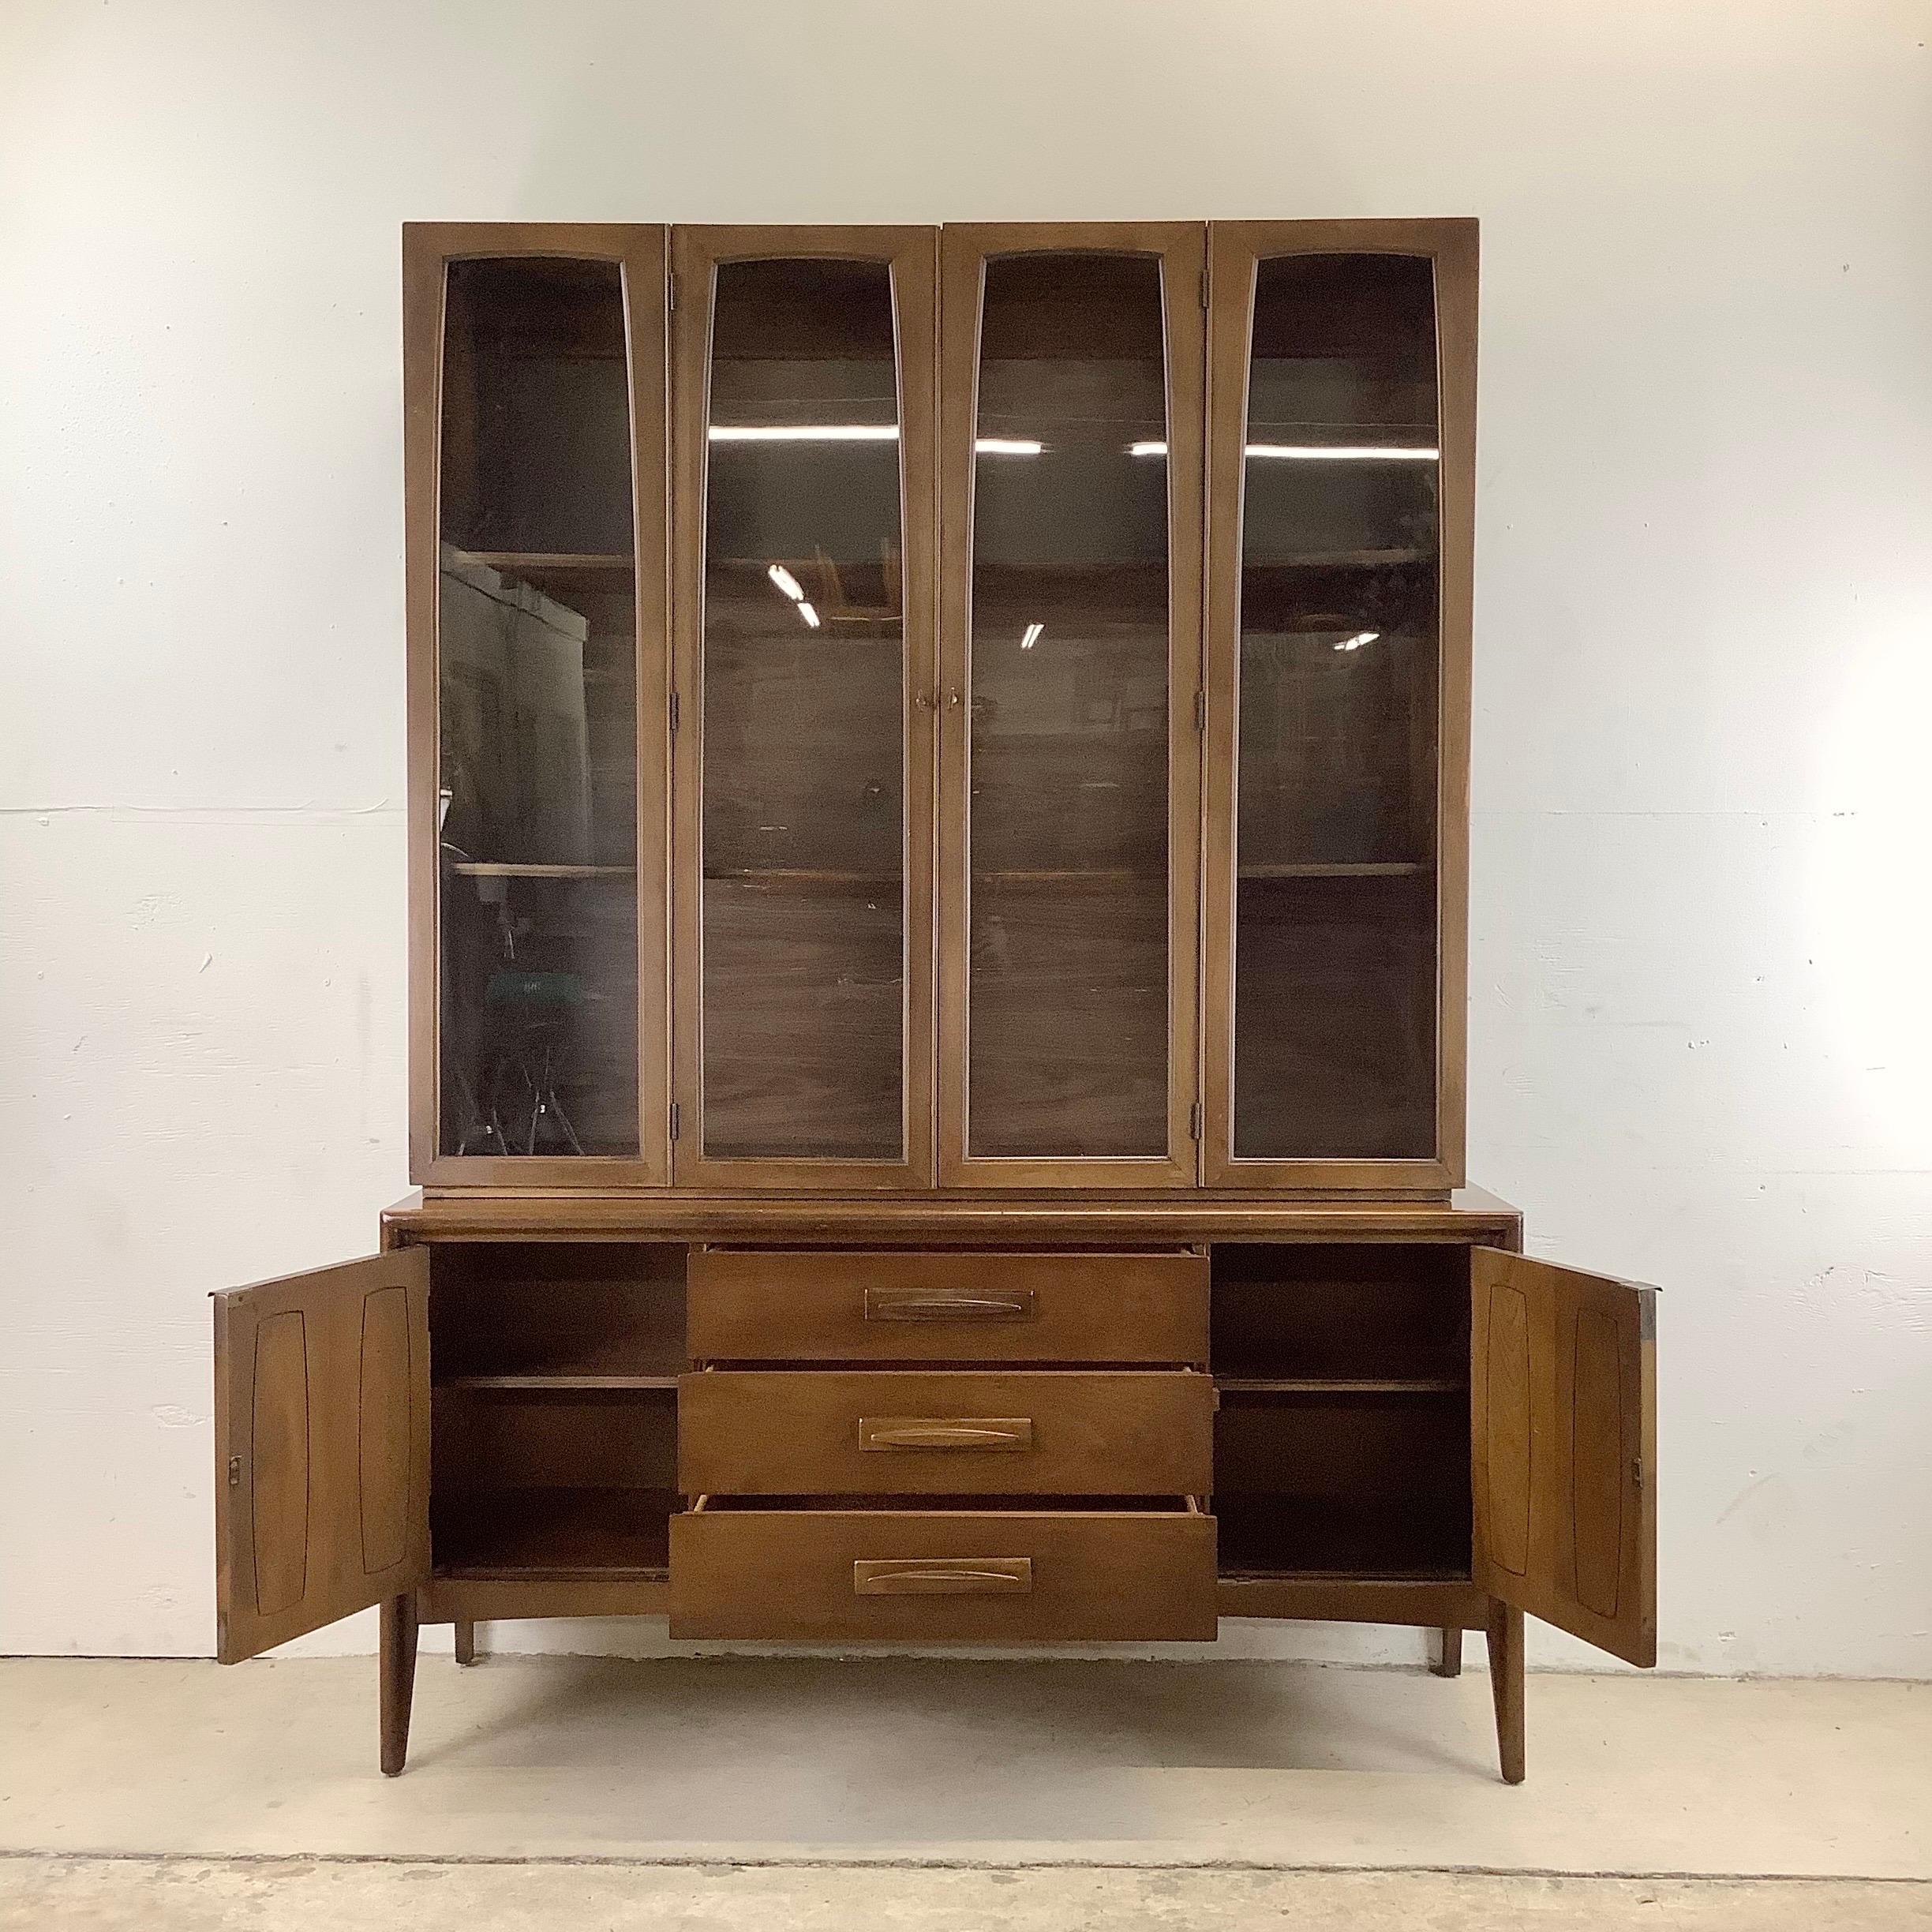 This stylish midcentury sideboard with china cabinet display top features sculpted drawer pulls and features plenty of storage and display space. This two piece sideboard from Broyhill makes an impressive statement piece perfect for home or business